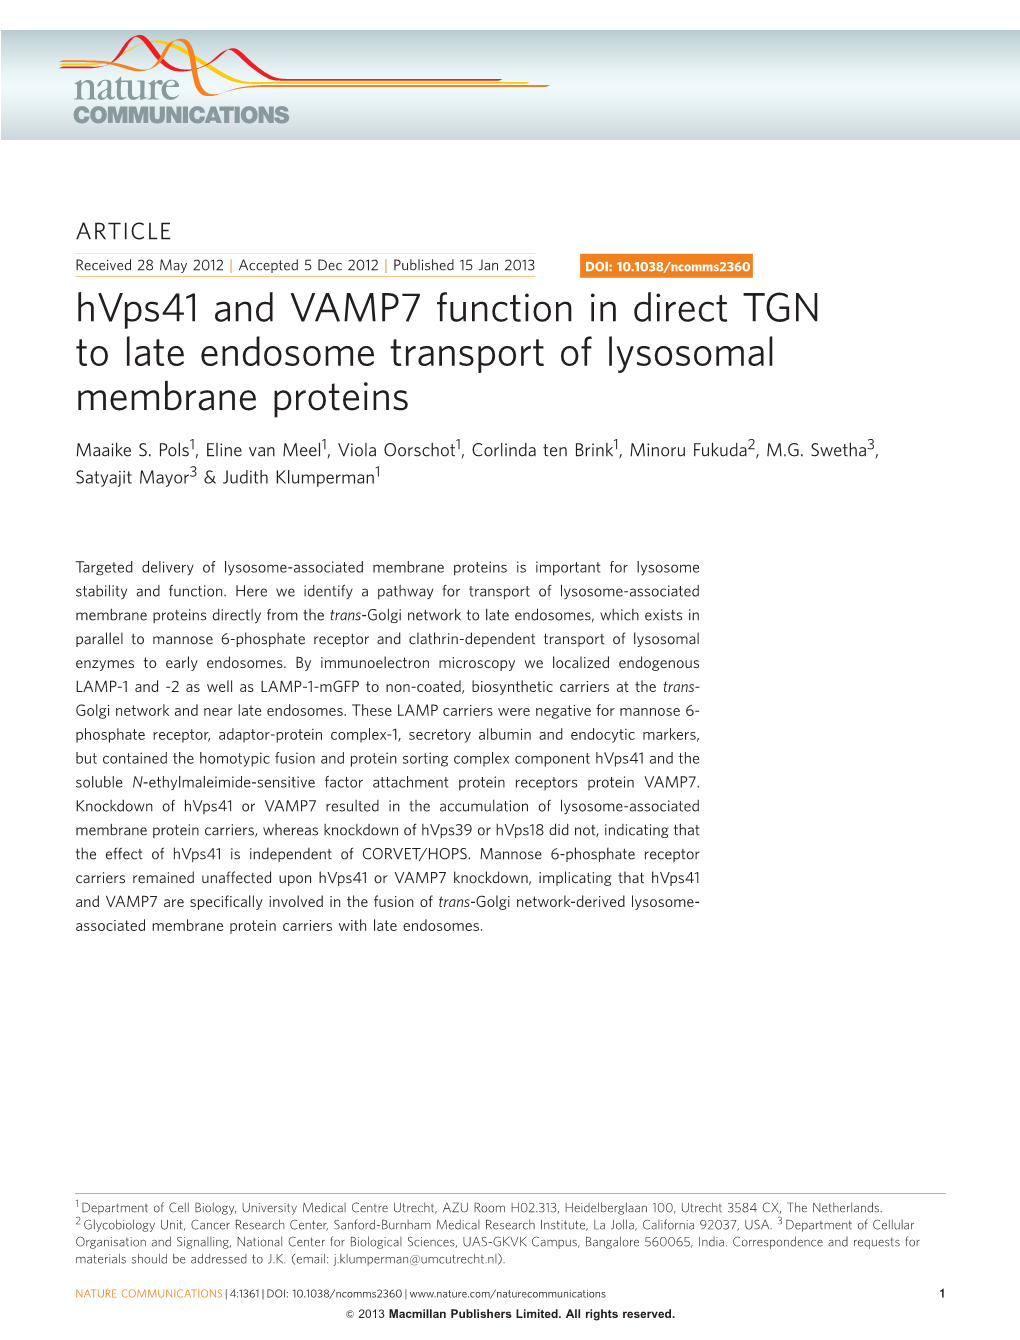 Hvps41 and VAMP7 Function in Direct TGN to Late Endosome Transport of Lysosomal Membrane Proteins